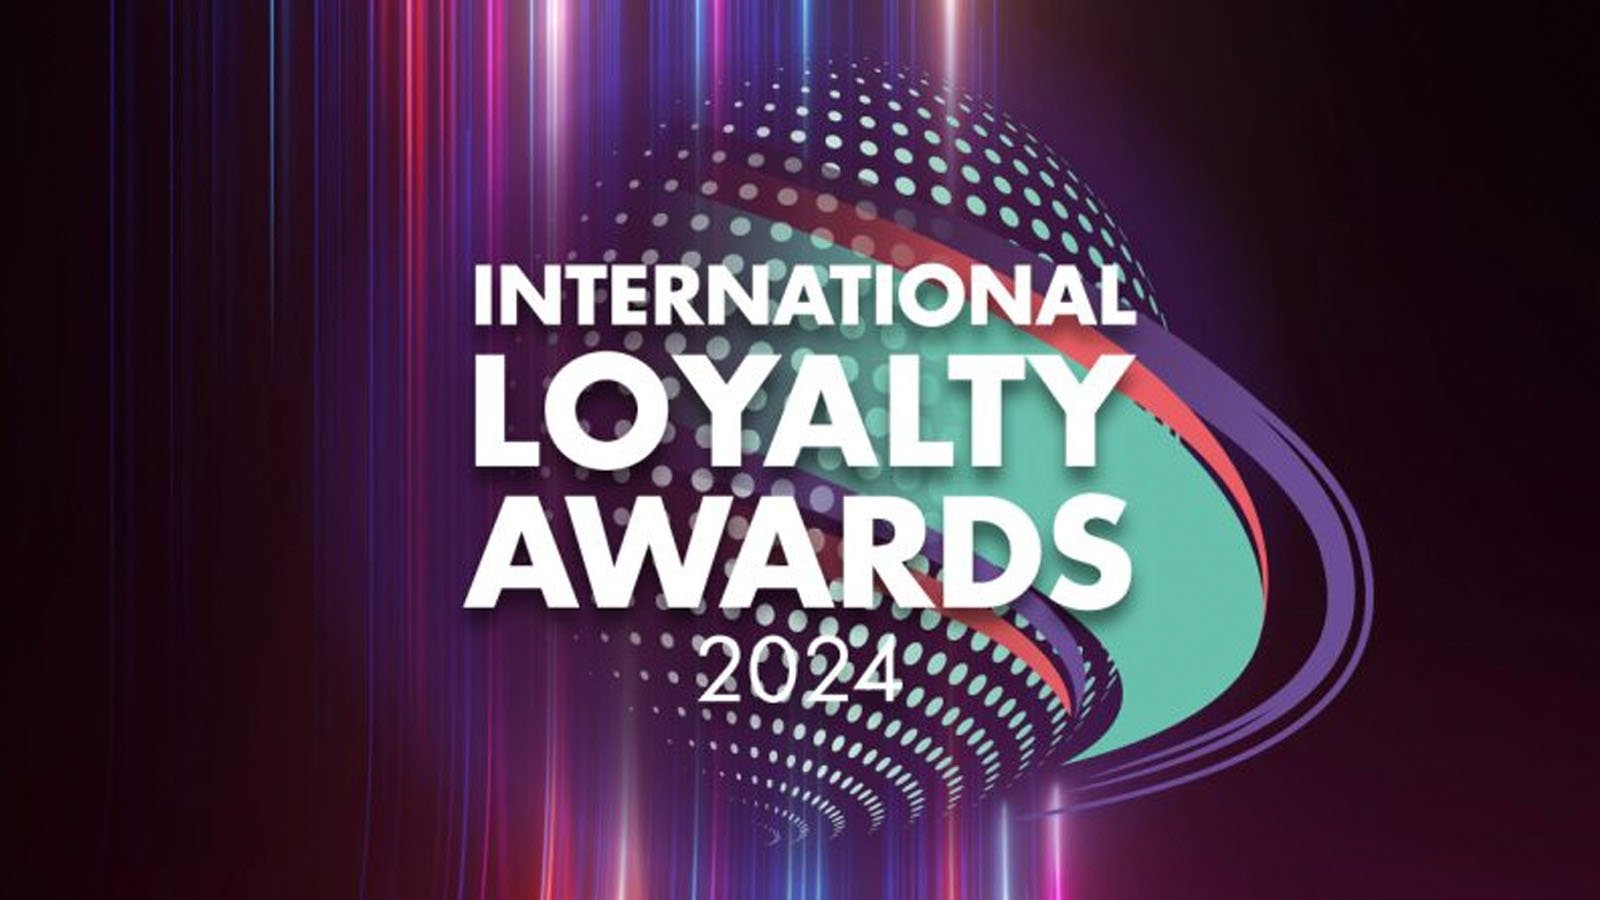 Vote for Our Loyalty Innovations in the International Loyalty Awards!